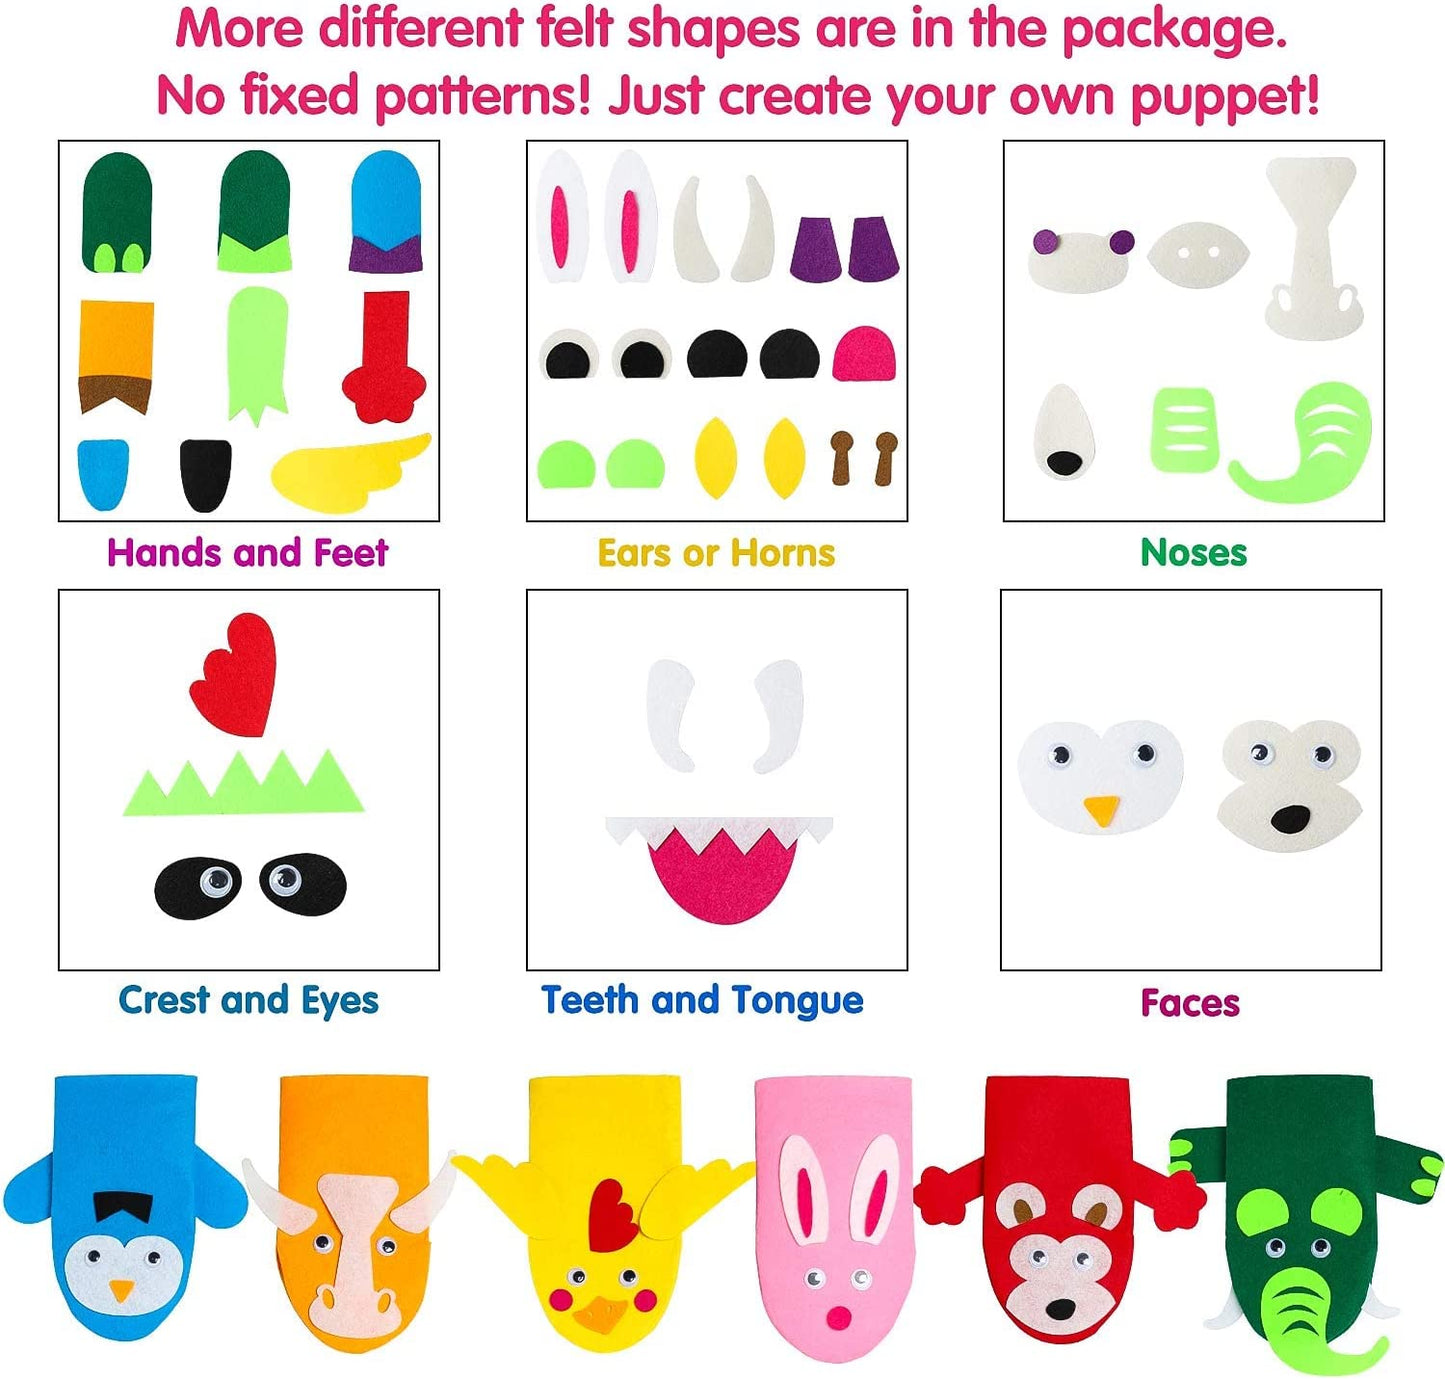 6Pcs Hand Puppet Making Kit for Kids Art Craft Felt Sock Puppet Toys Creative DIY Make Your Own Puppets Pompoms Wiggle Googly Eyes Storytelling Role Play Party Supplies Gift for Girls Boys